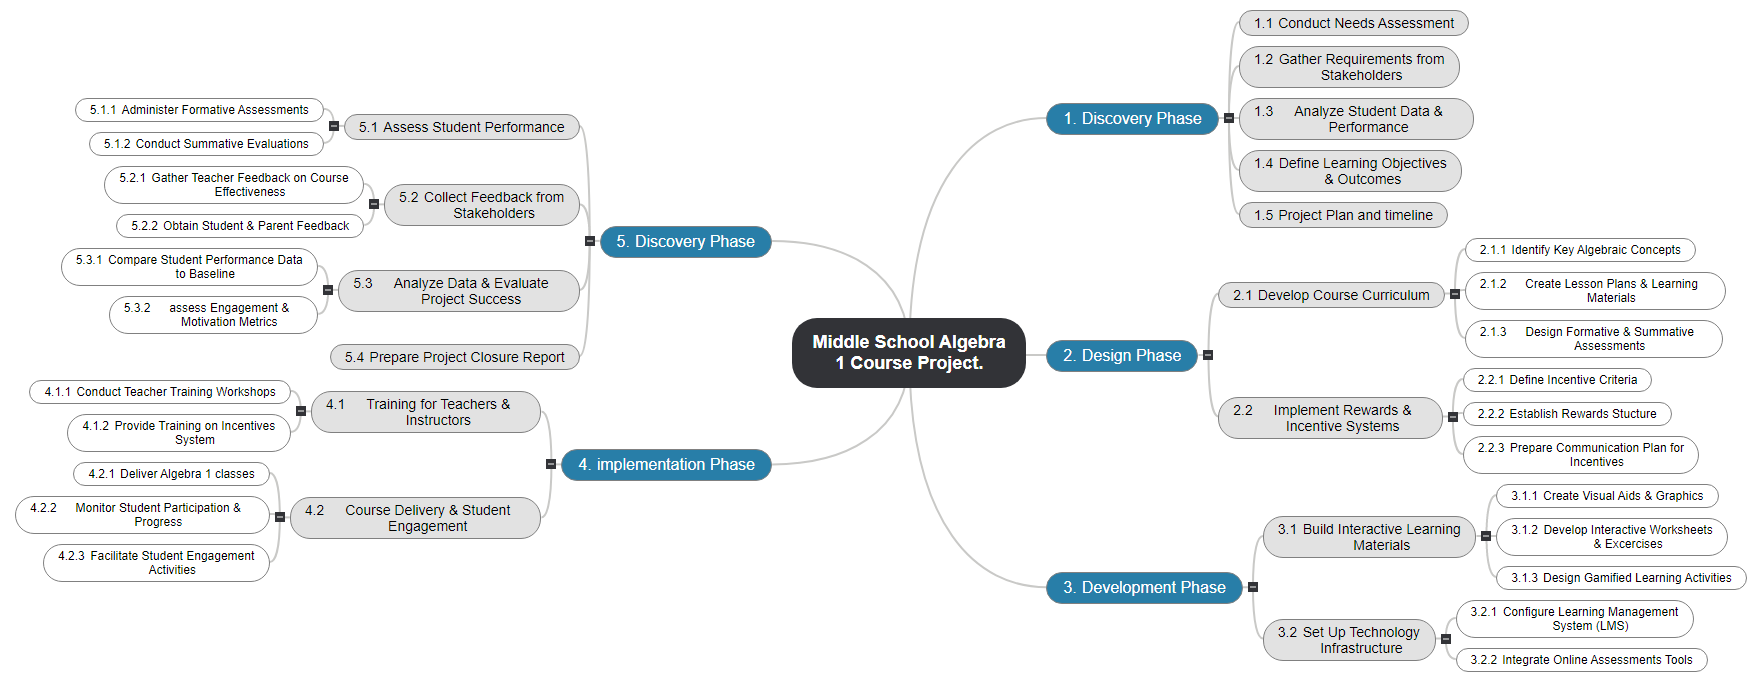 Middle School Algebra 1 Course Project. Mind Map